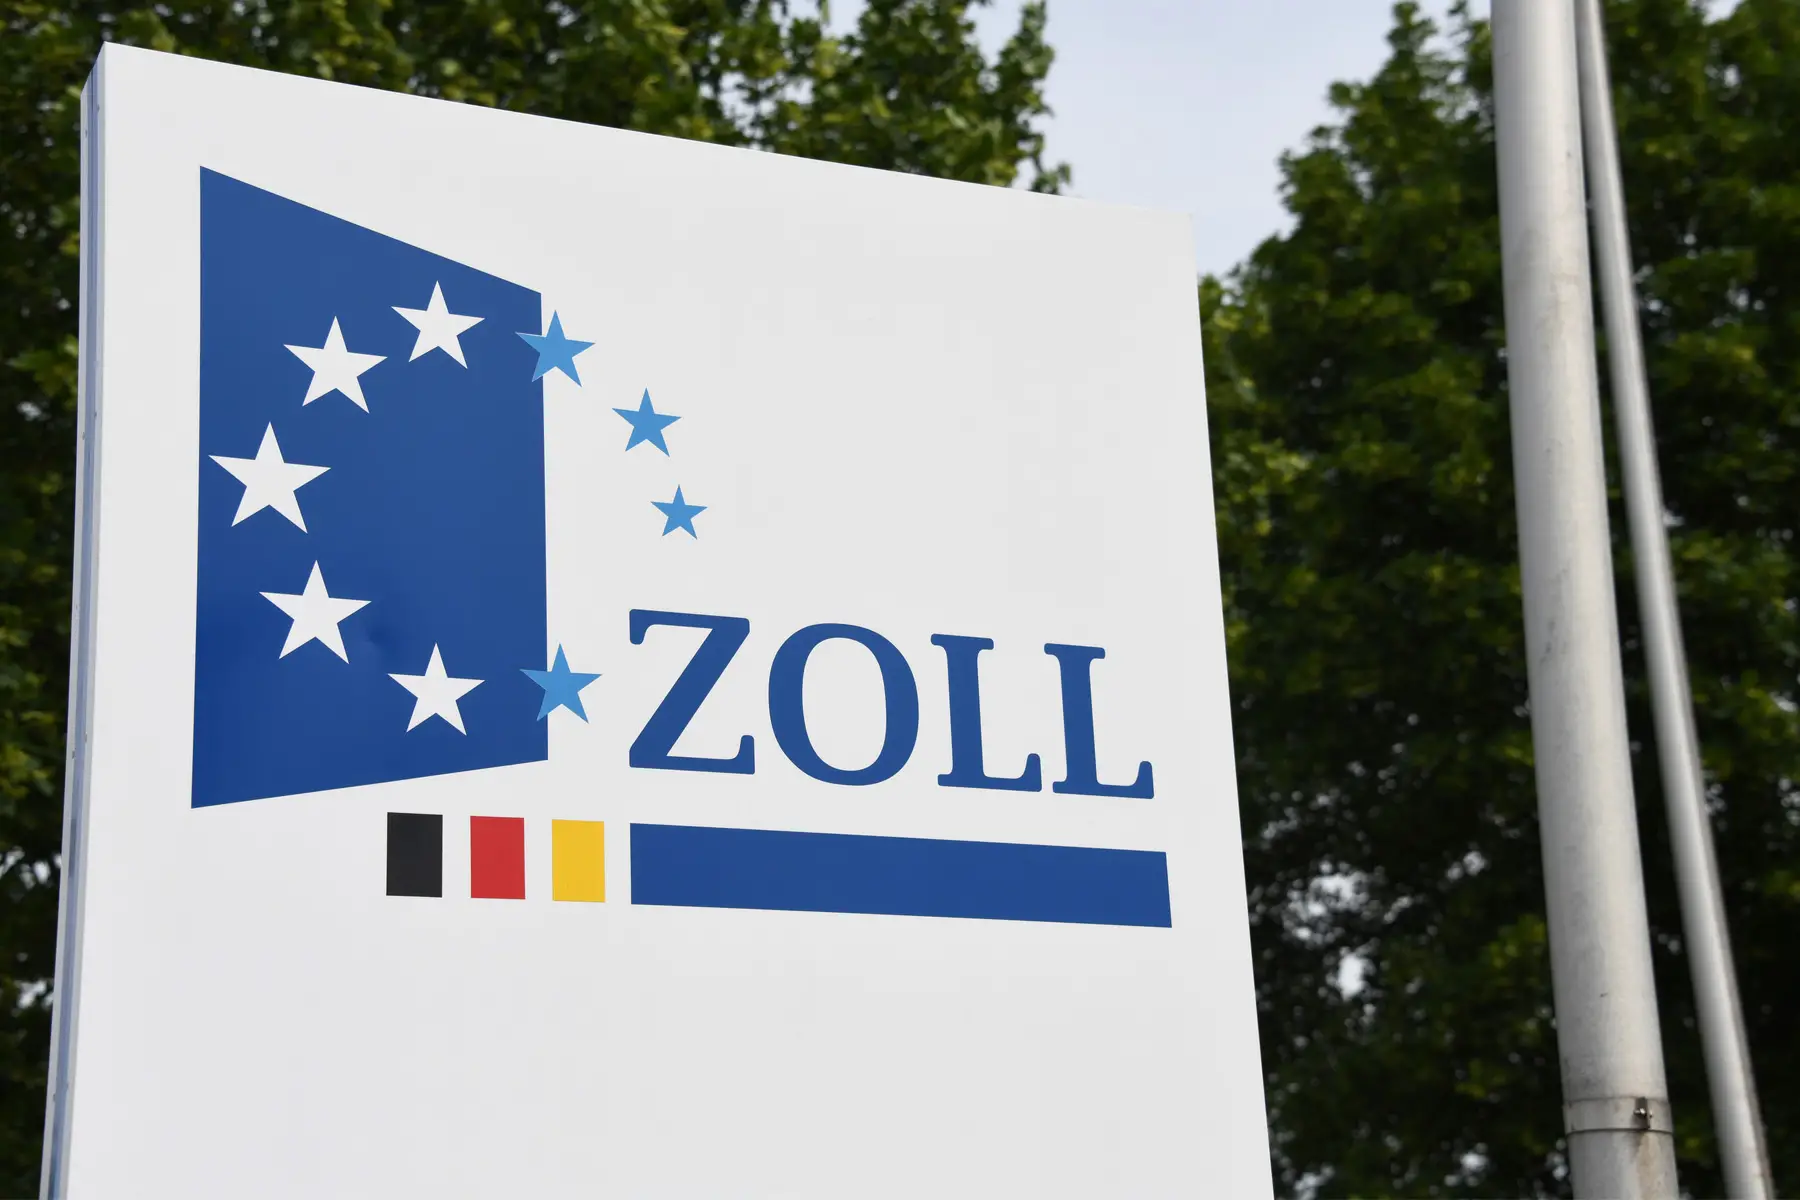 sign for German customs office, Zoll